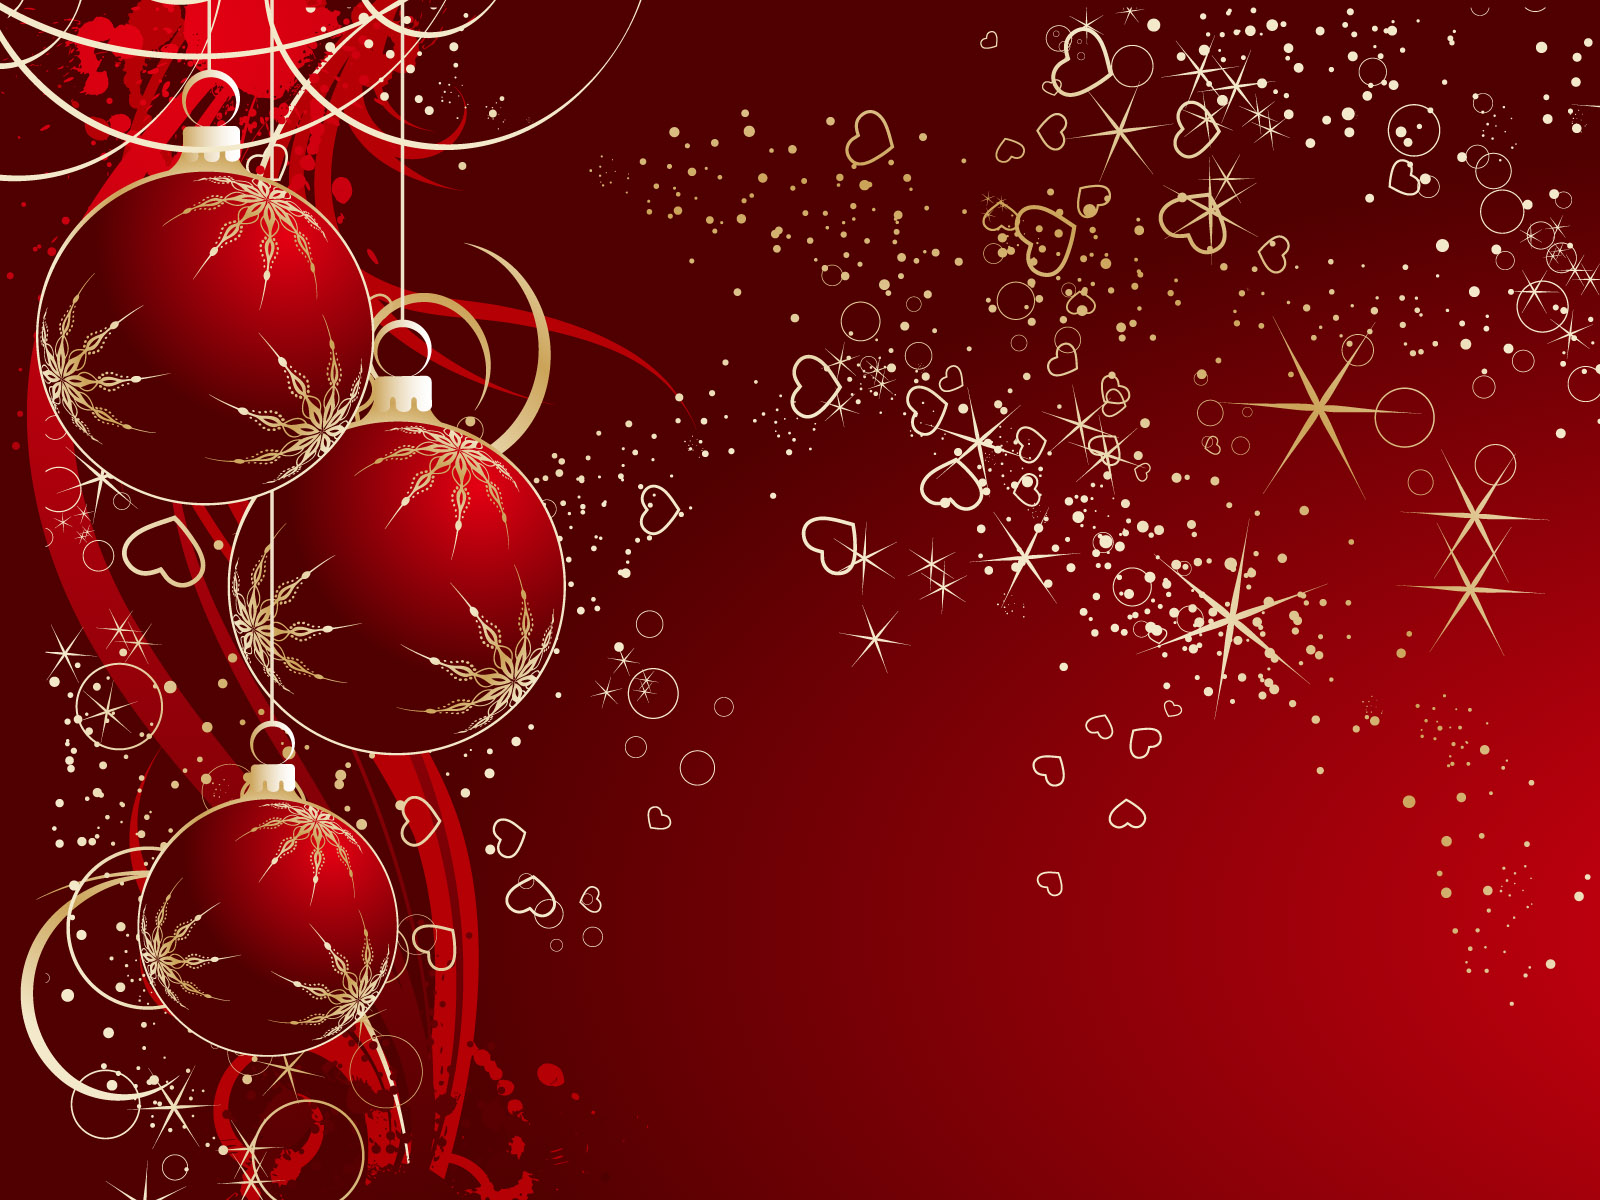 Wallpaper Red And White Christmas Wallpaper Full HD Collection